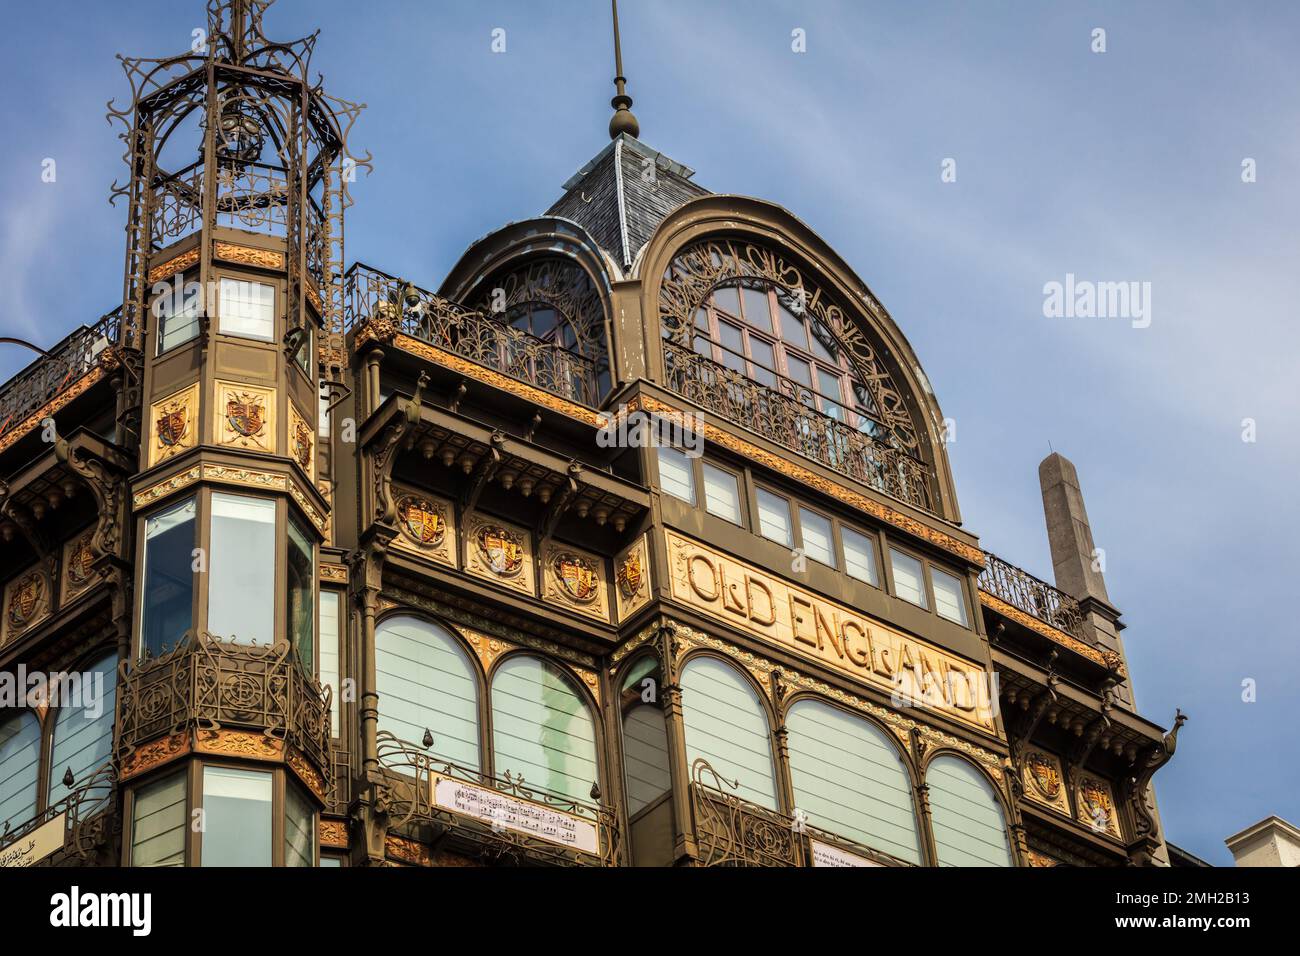 The Old England, an Art Nouveau building, now the home of a museum of musical instruments. Brussels. Belgium. Stock Photo